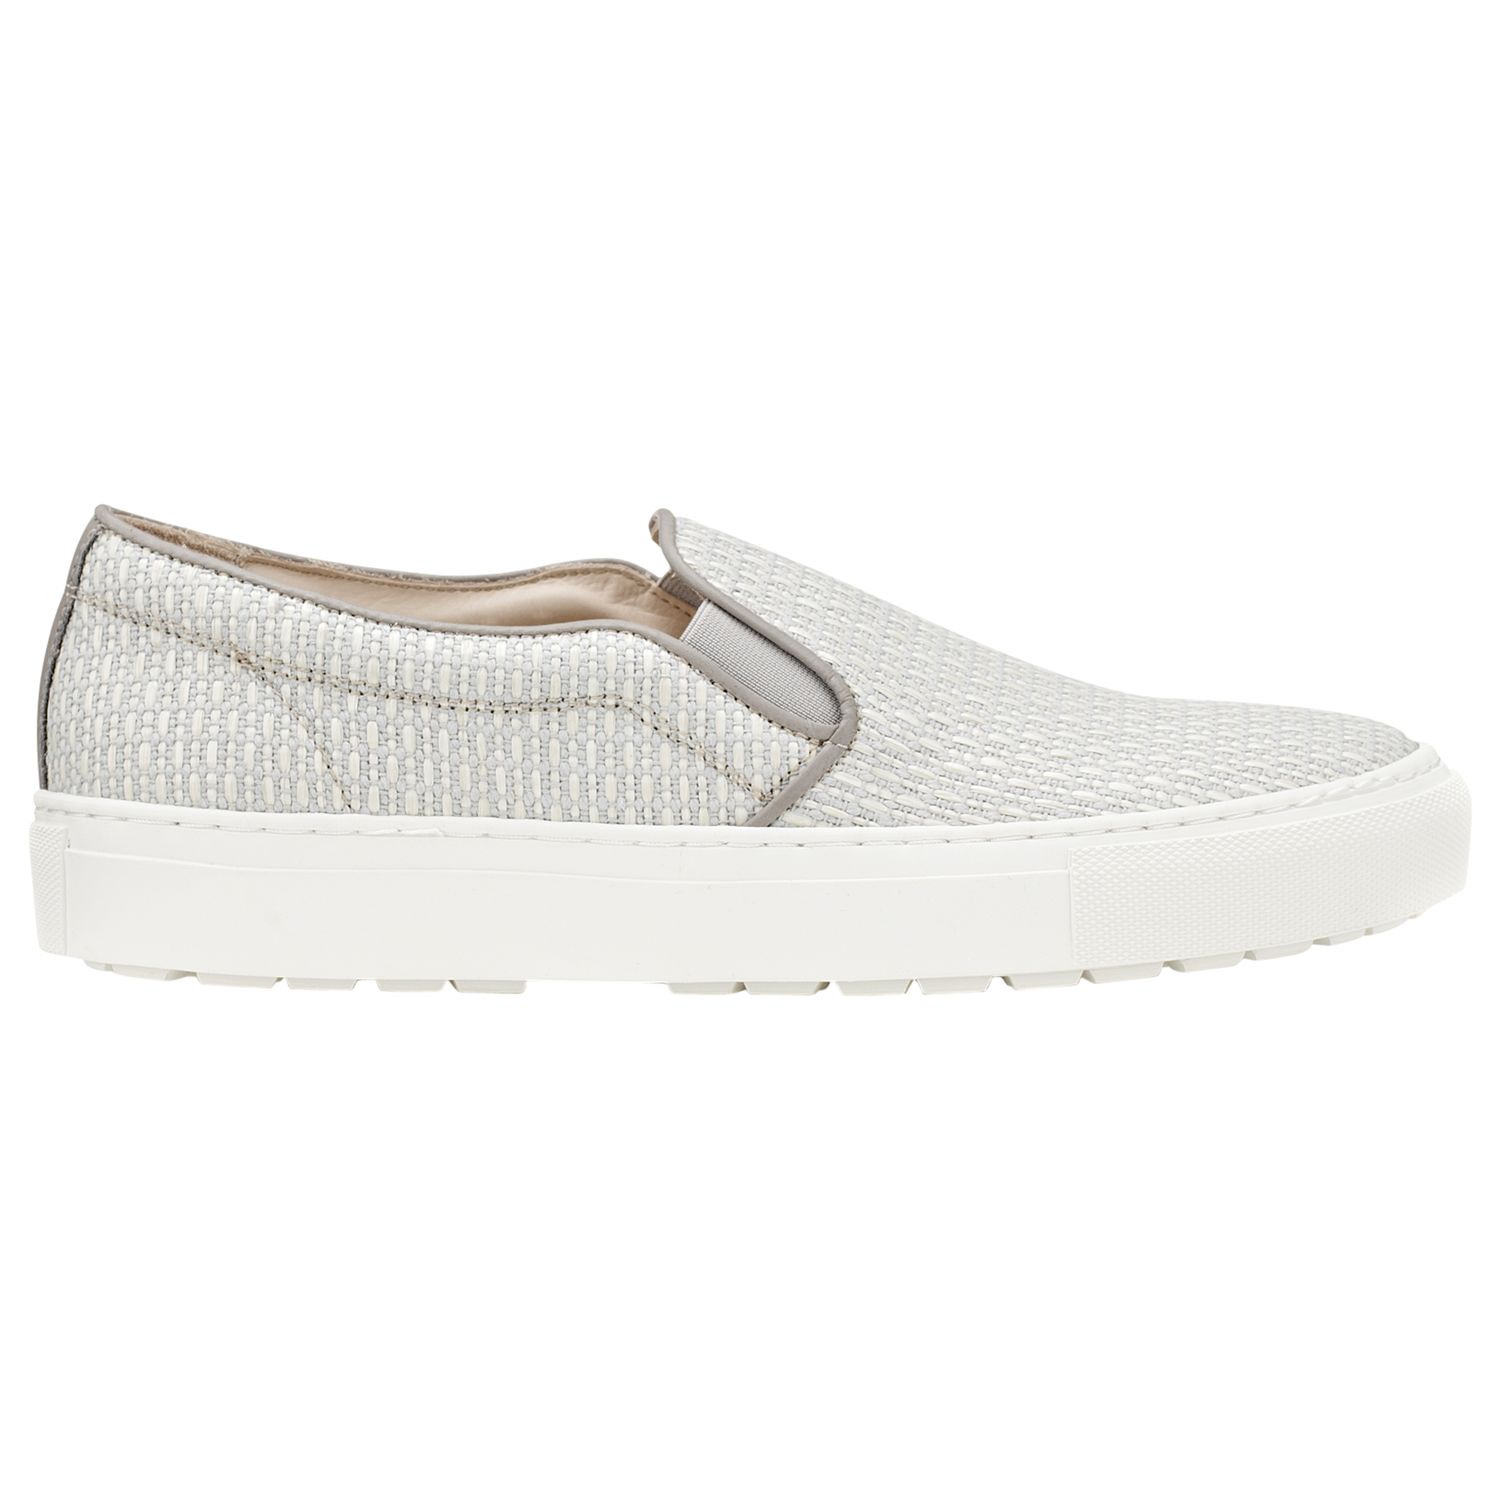 Buy Whistles Lena Slip On Trainers Online at johnlewis.com